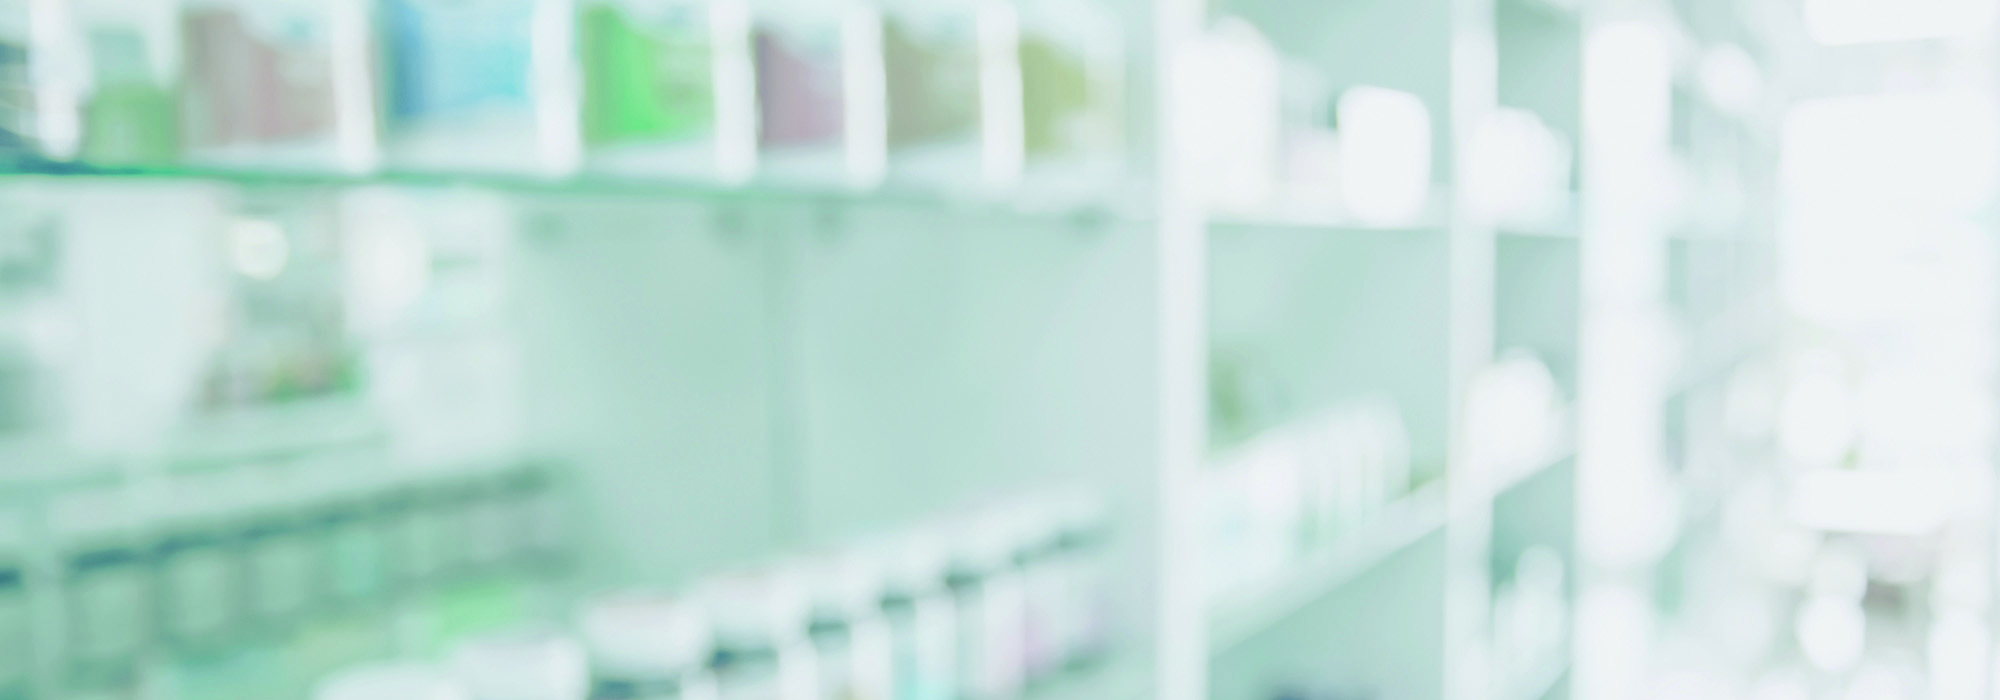 Pharmacy blurred light tone with store drugs shelves interior background, Concept of pharmacist and chemist.